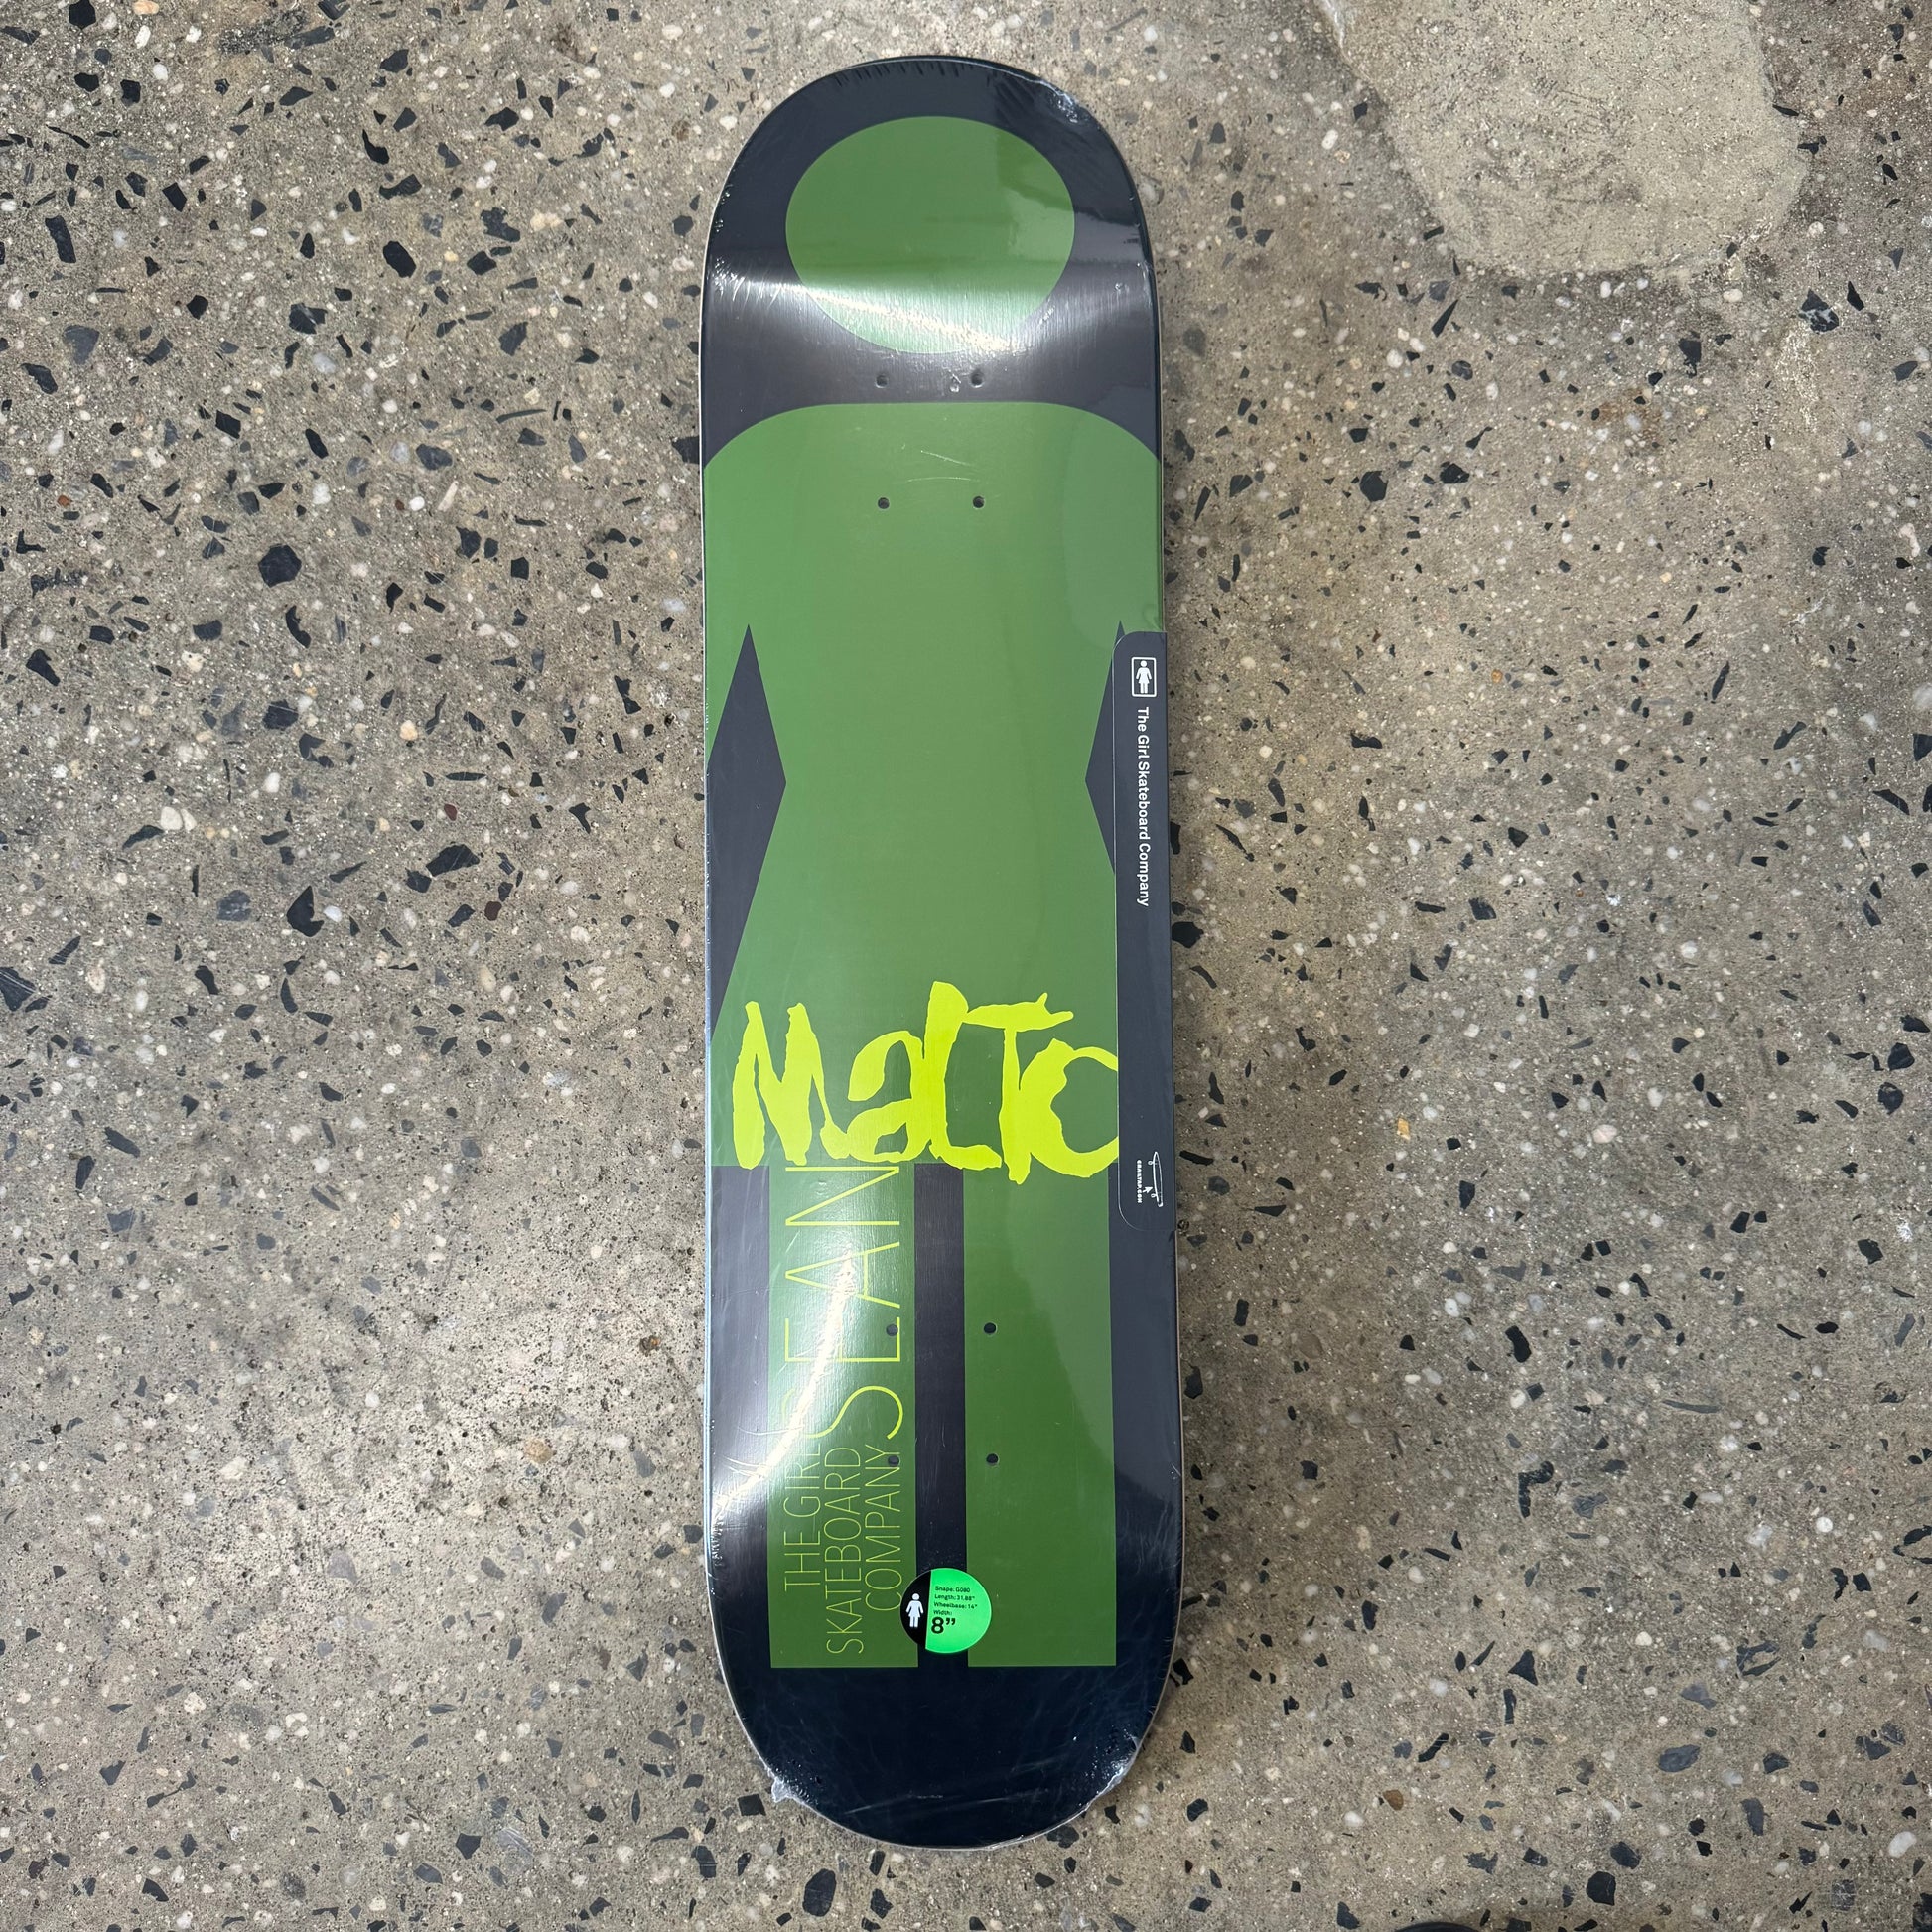 green girl logo on black skate deck with yellow writing